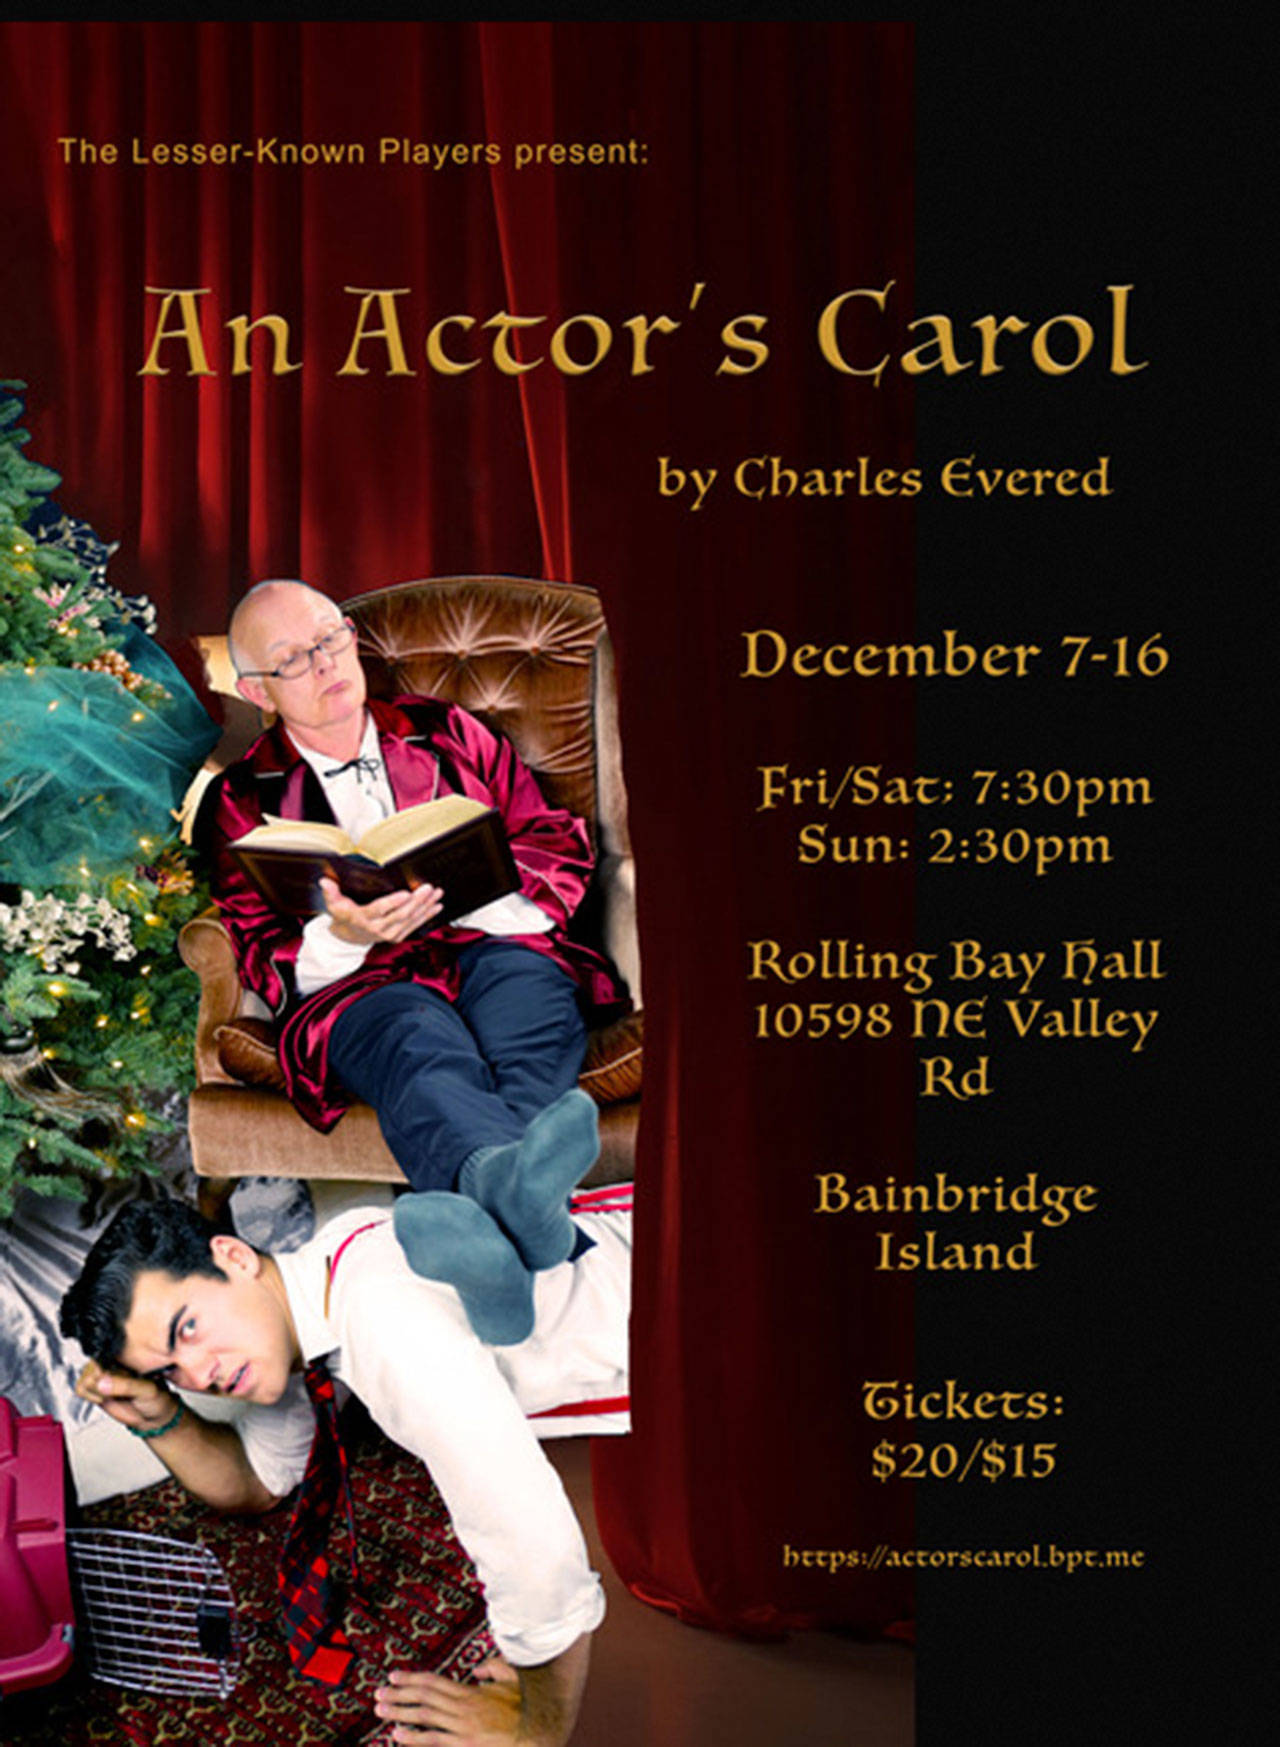 Image courtesy of Lesser Known Players | “An Actor’s Carol,” a new and as-yet unpublished work by playwright Charles Evered, will be staged by Bainbridge Island’s own Lesser-Known Players as the group’s annual quasi-holiday show, throughout two weekends in December at Rolling Bay Hall.